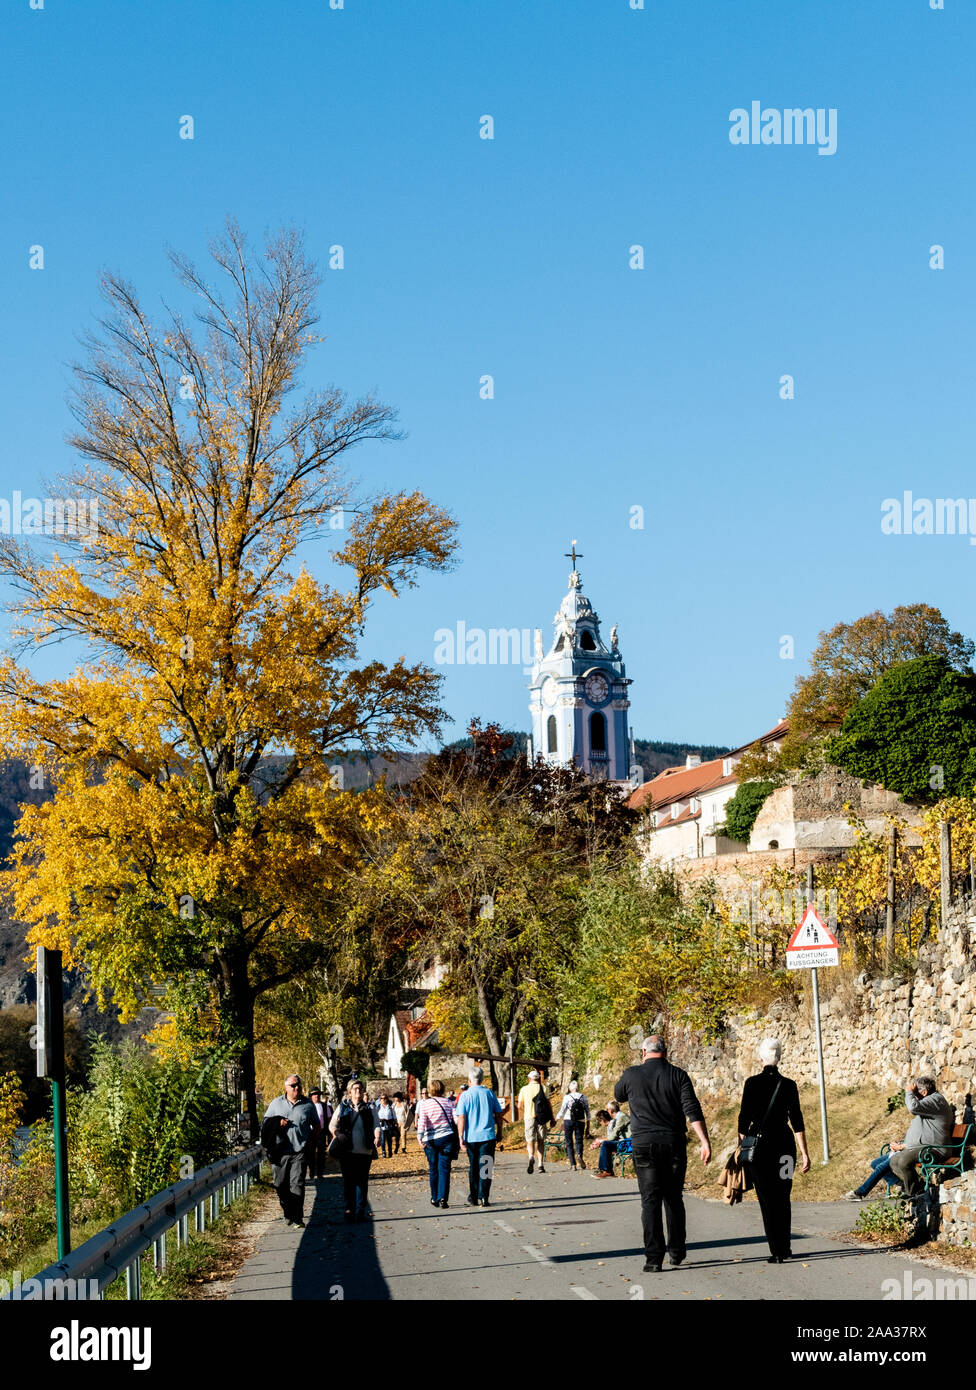 Tourists walking along the river Danube bank at Durnstein, Austria, with the Monastery in the background Stock Photo